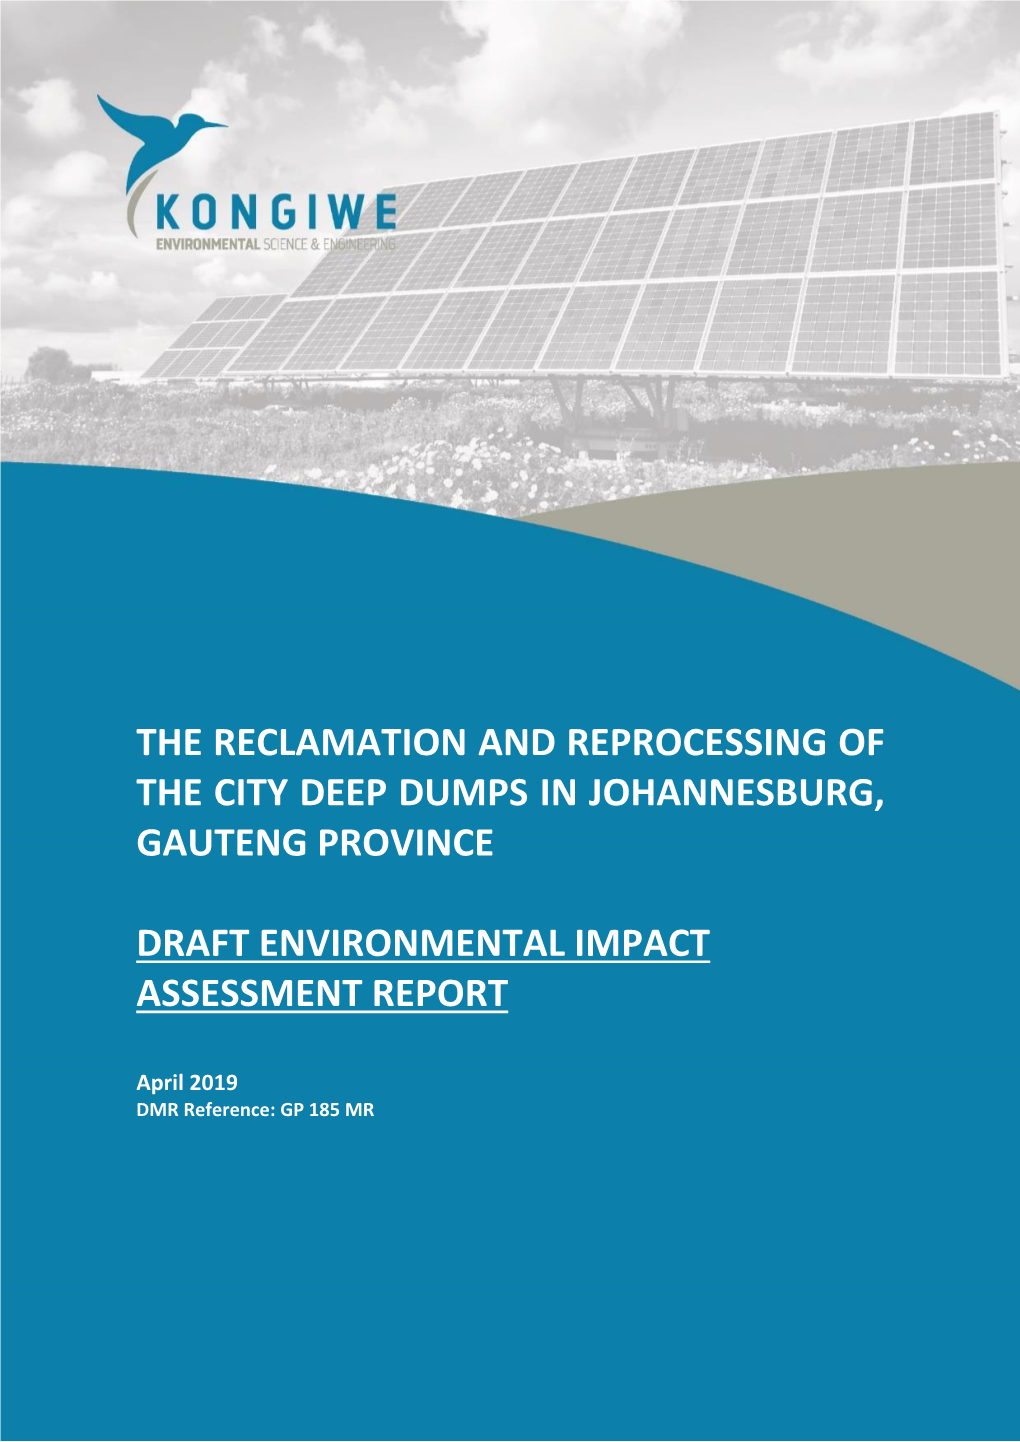 The Reclamation and Reprocessing of the City Deep Dumps in Johannesburg, Gauteng Province